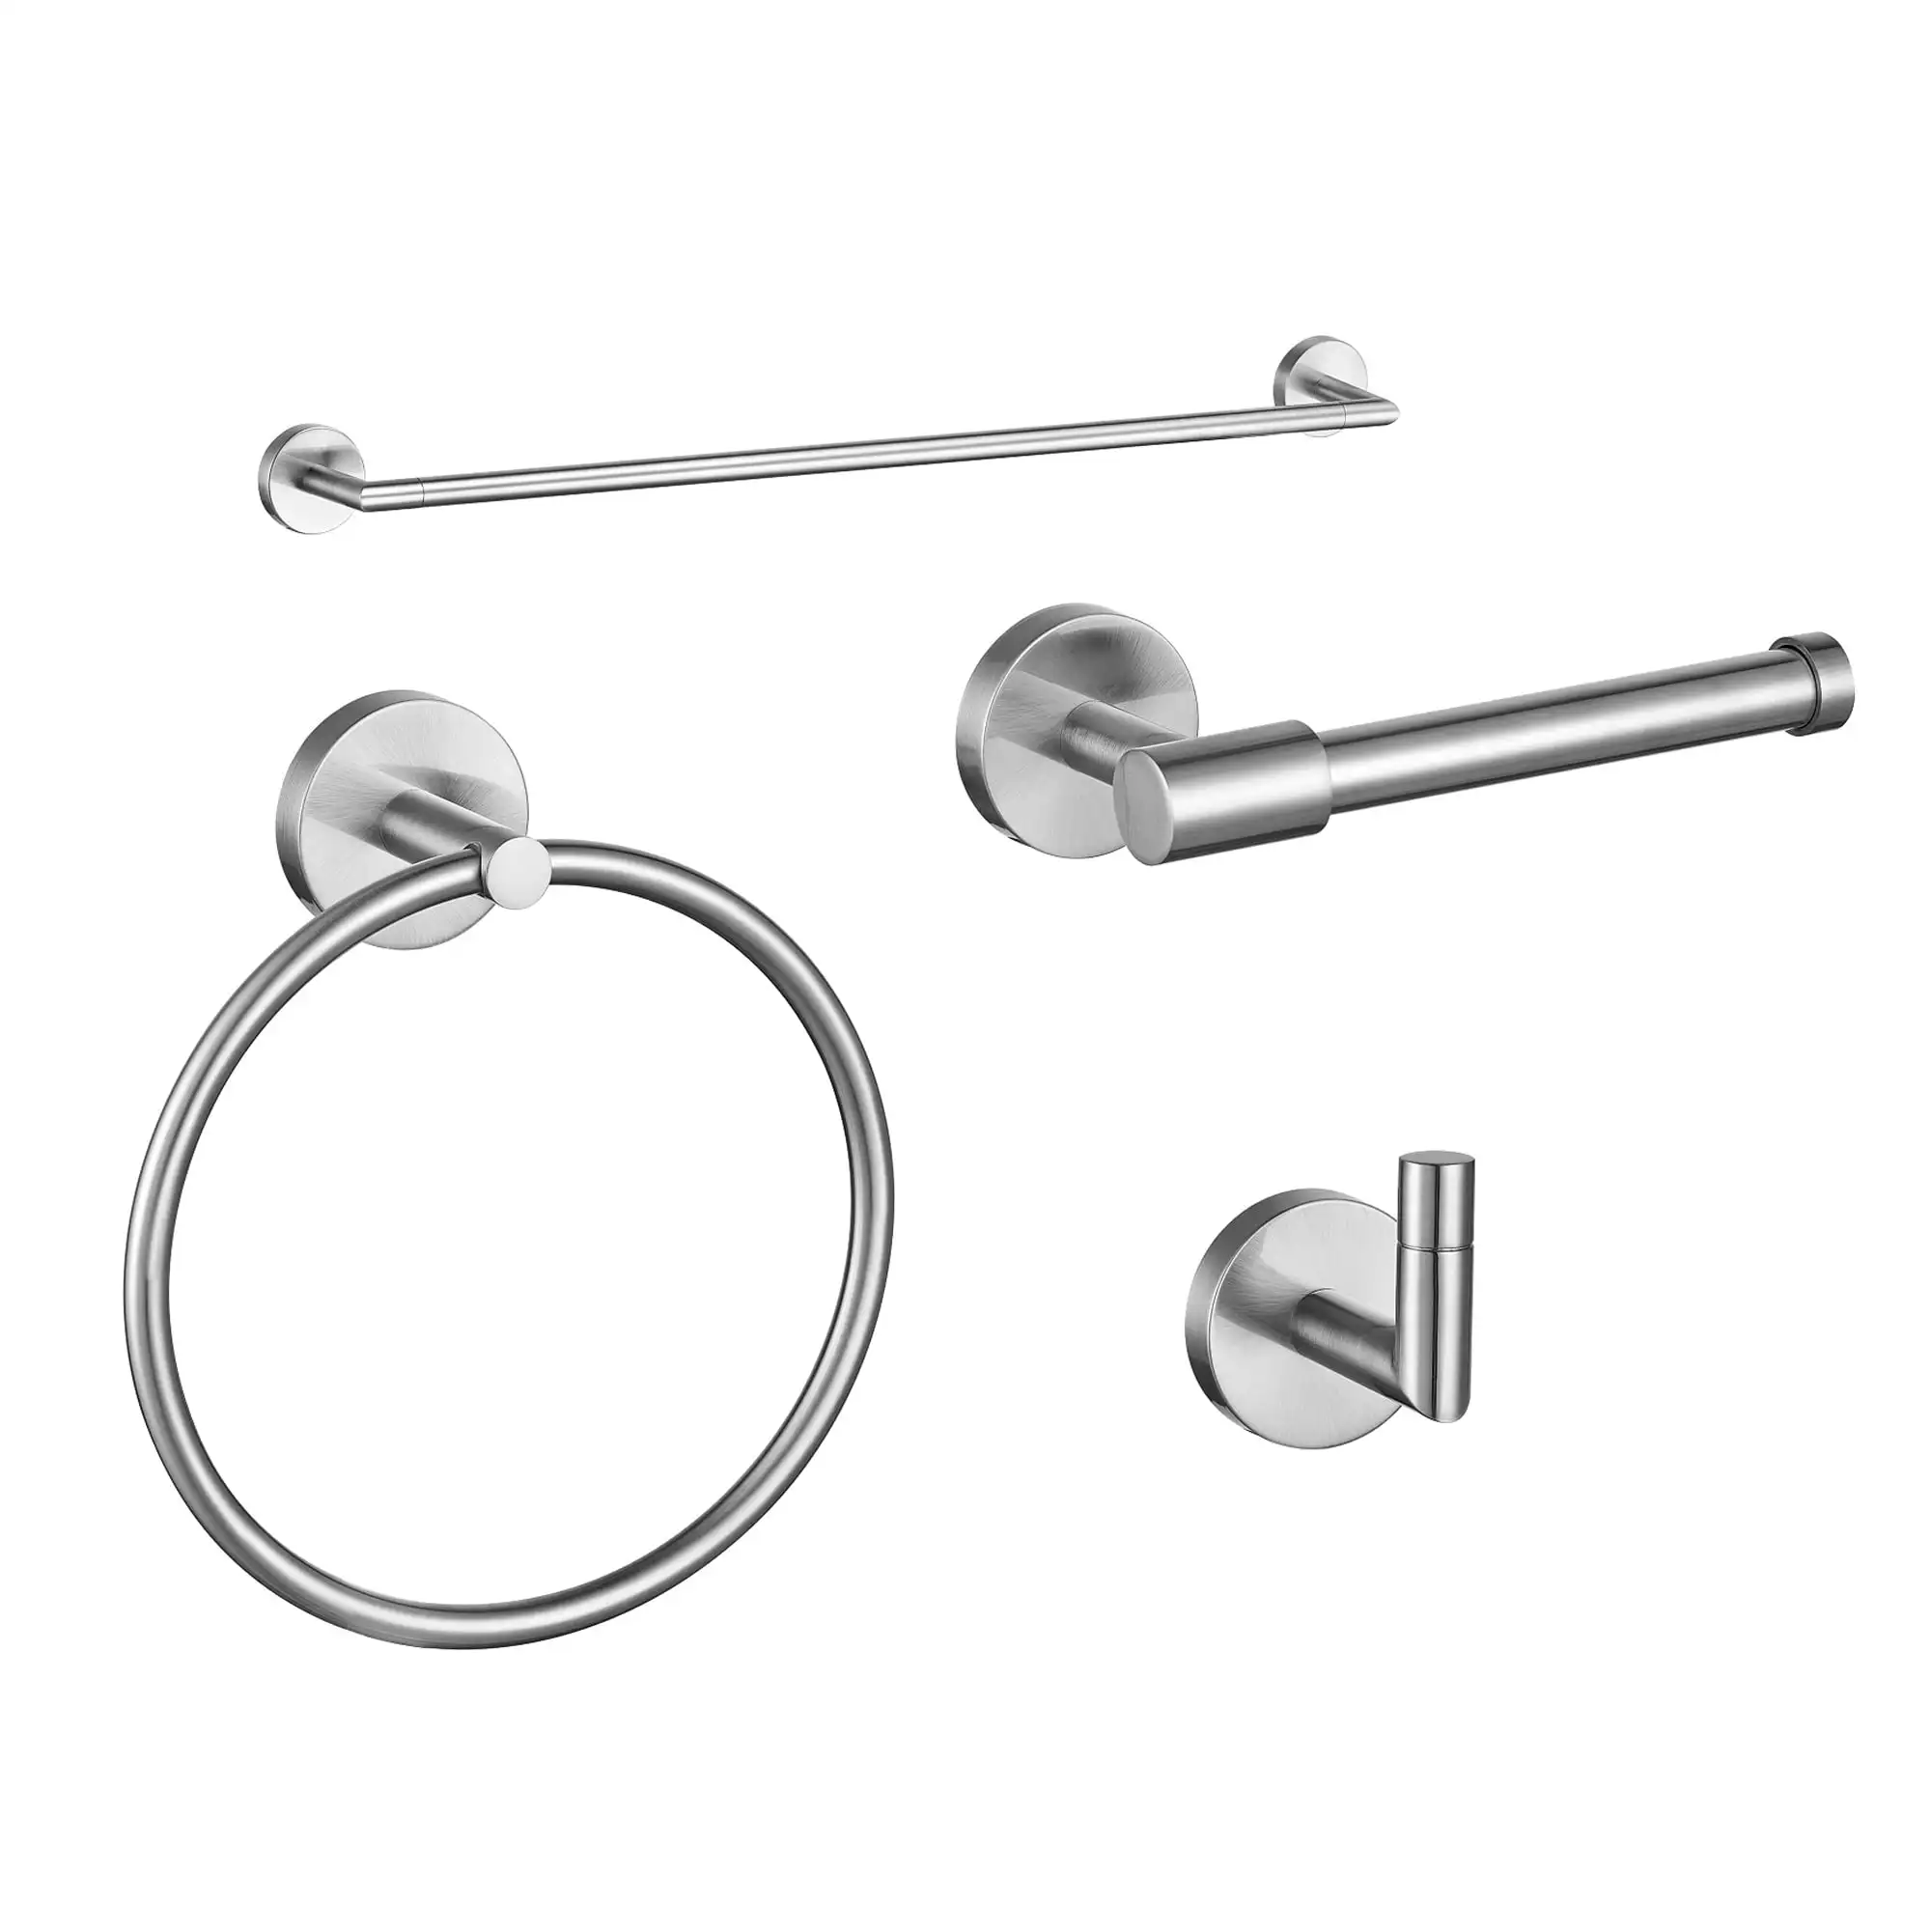 

Graz 4-Piece Bathroom Hardware Accessory Kit Satin Nickel Sleek and Functional Design with Concealed Screws Adds Accessories